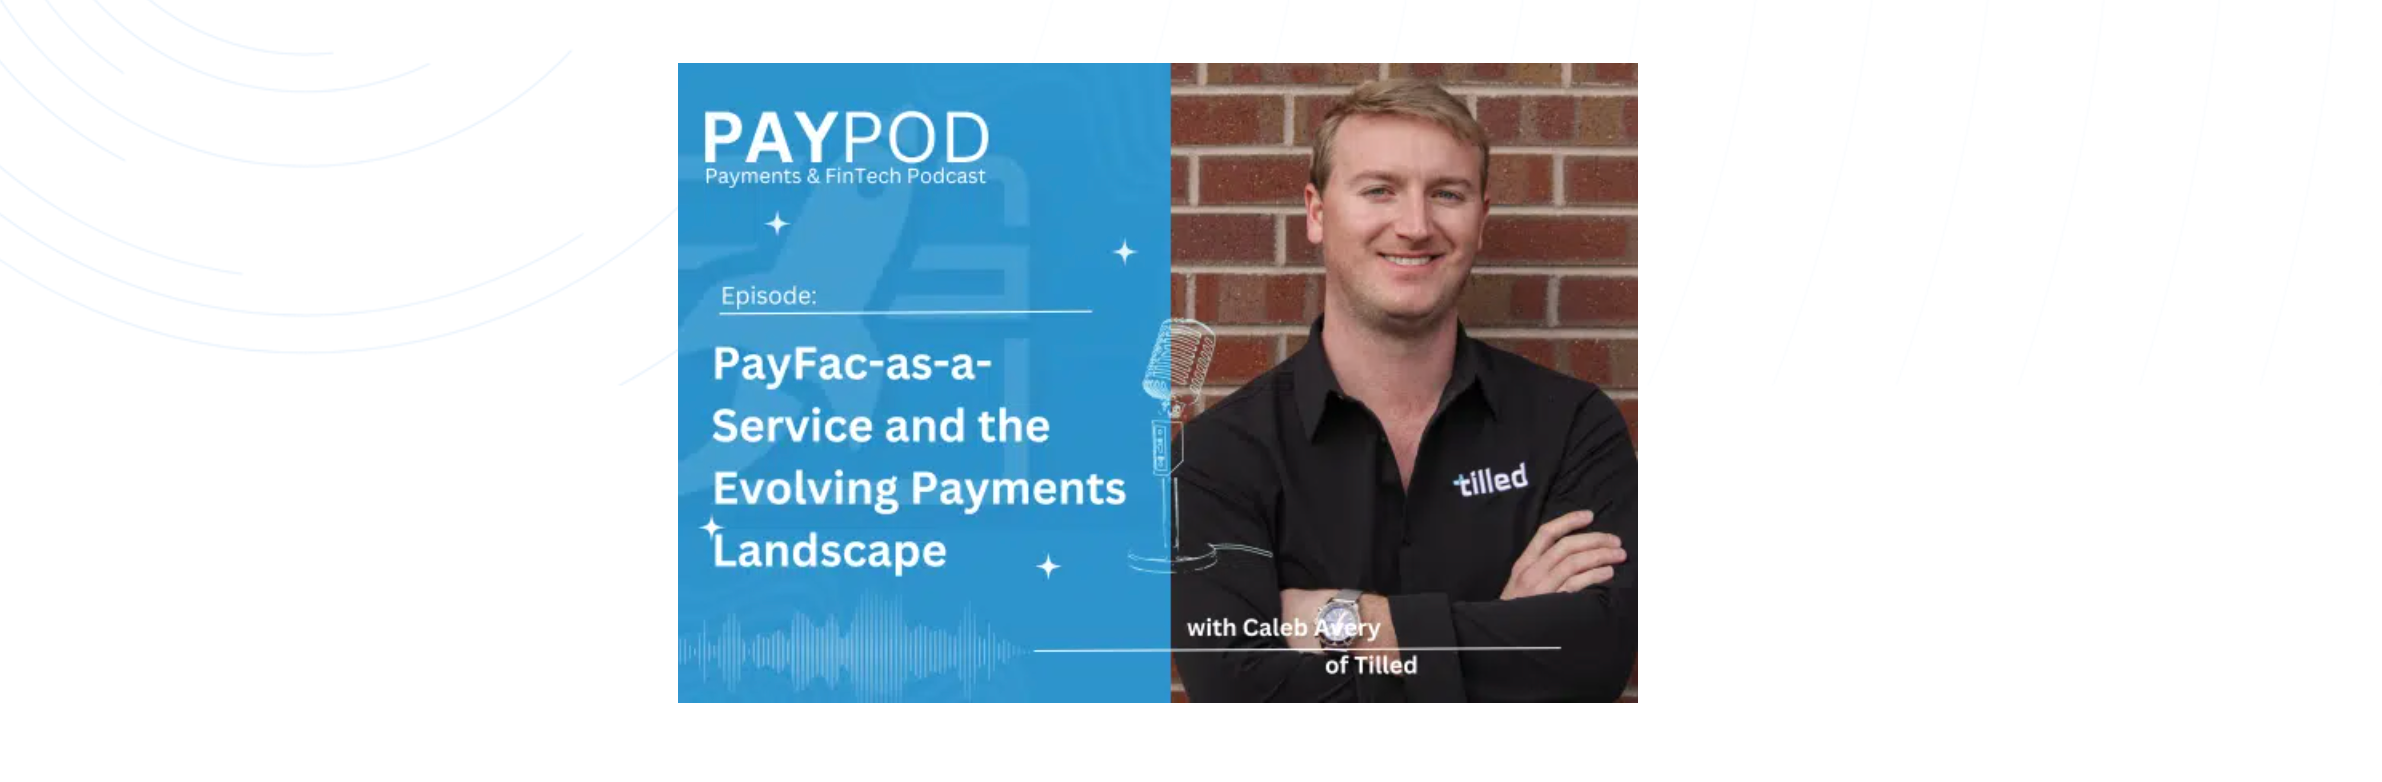 Exploring the Evolution of PayFac and the “As-a-Service” Approach